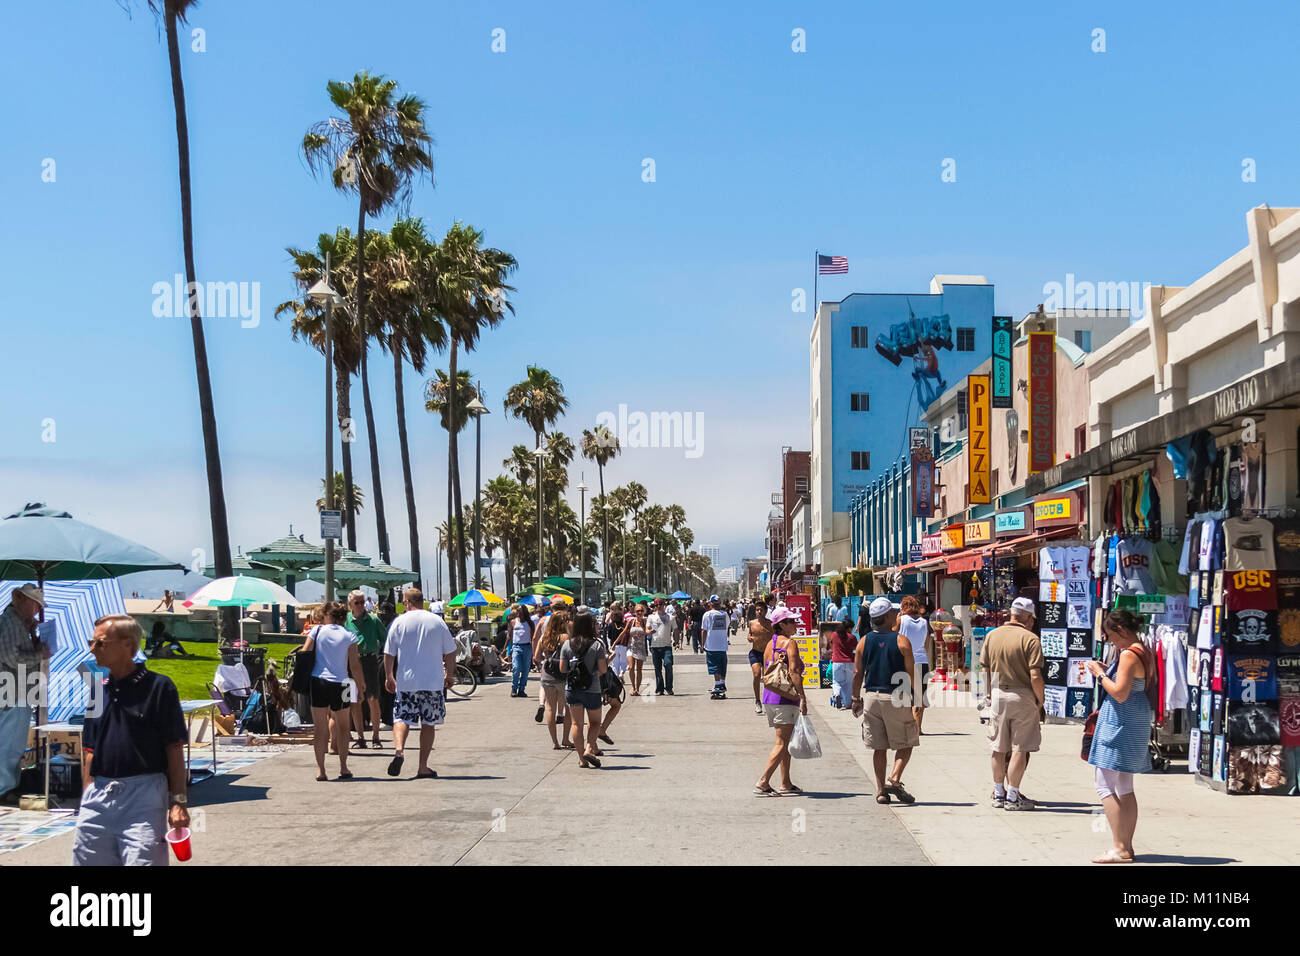 The crowded boardwalk of Venice Beach in Los Angeles during a sunny and ...